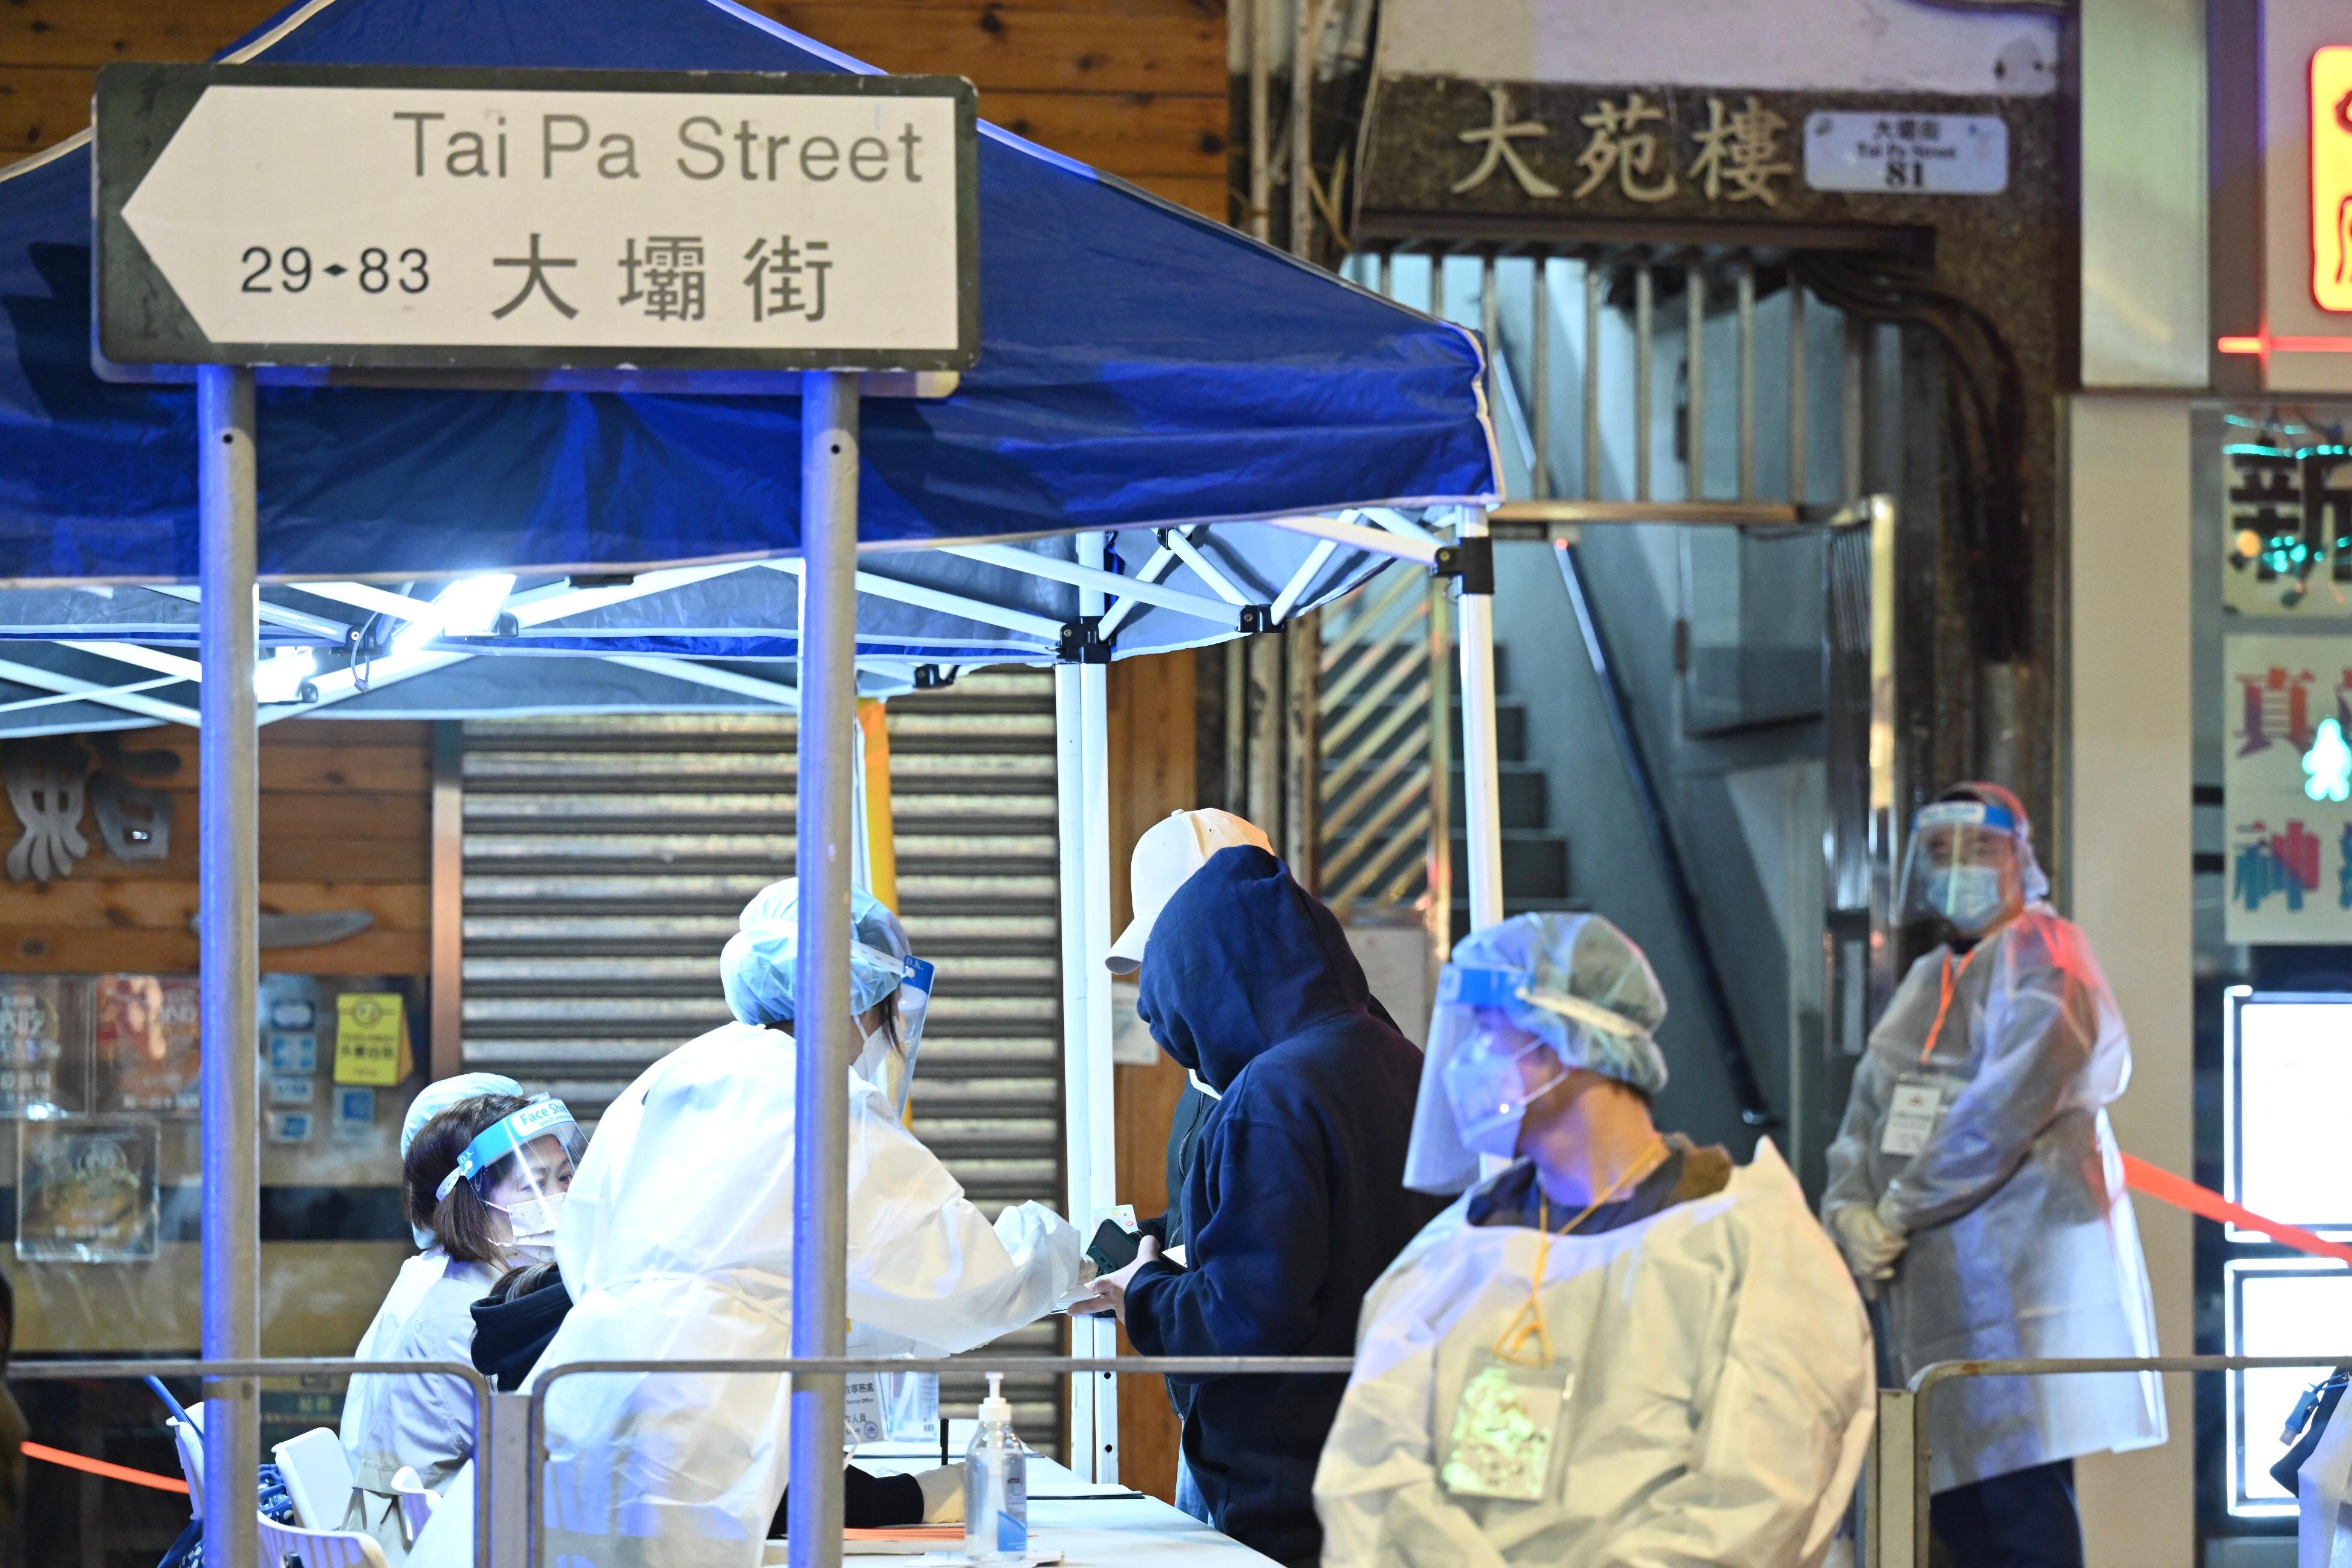 The Government yesterday (January 28) made a "restriction-testing declaration" and issued a compulsory testing notice in respect of the specified "restricted area" in Tsuen Wan (i.e. Tai Yuen House, 77-83 Tai Pa Street, Tsuen Wan, excluding the shops located on the ground floor of Tai Yuen House), under which people within the specified "restricted area" in Tsuen Wan were required to stay in their premises and undergo compulsory testing. Photo shows staff members registering persons subject to compulsory testing in the "restricted area" to undergo testing.